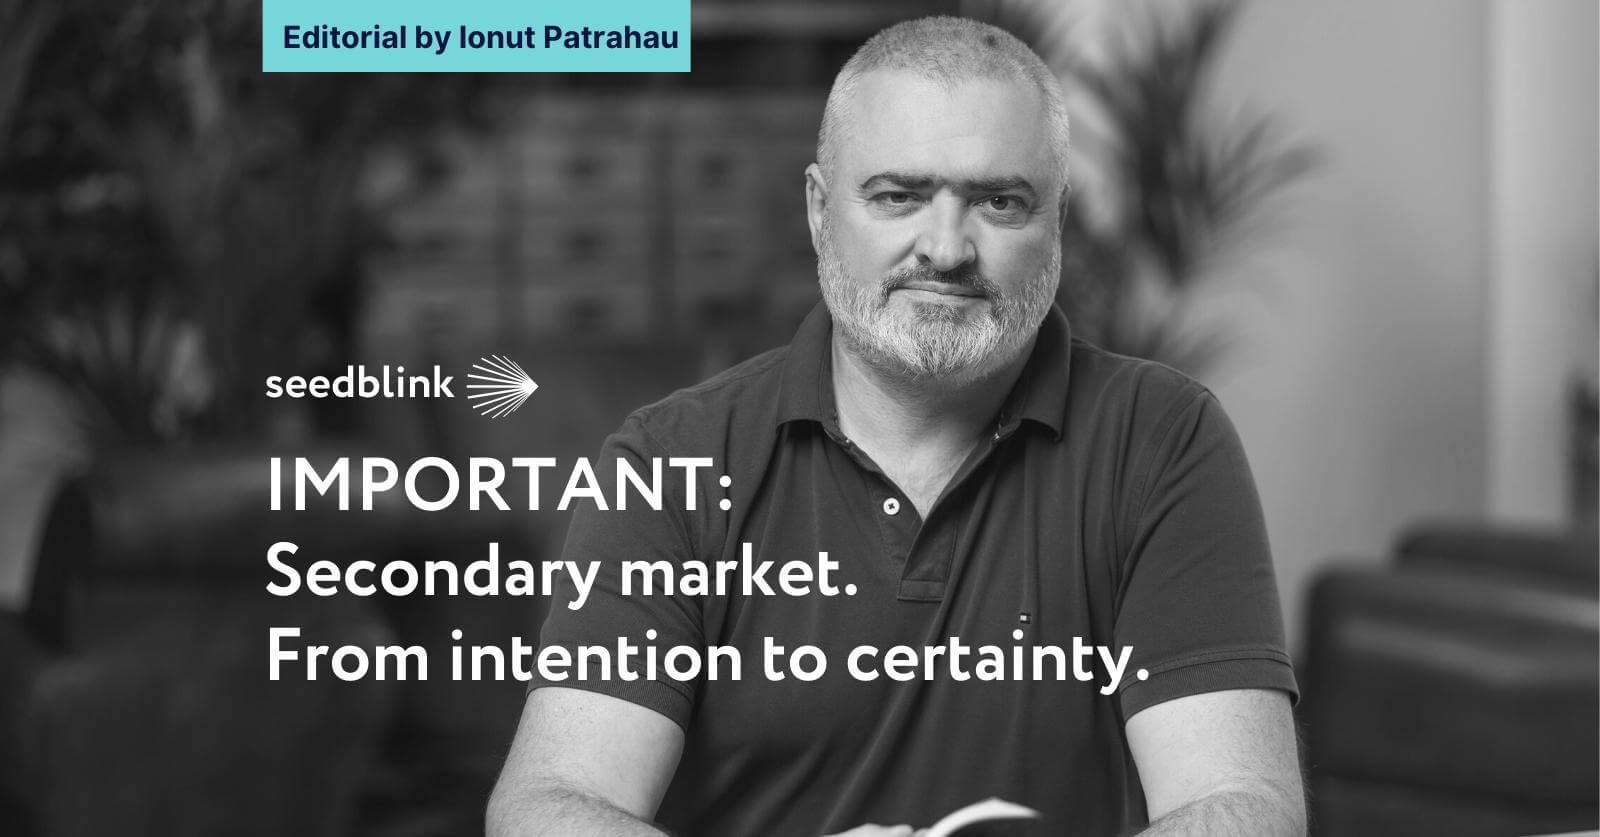 A secondary market. From intention to certainty - Editorial by Ionut Patrahau